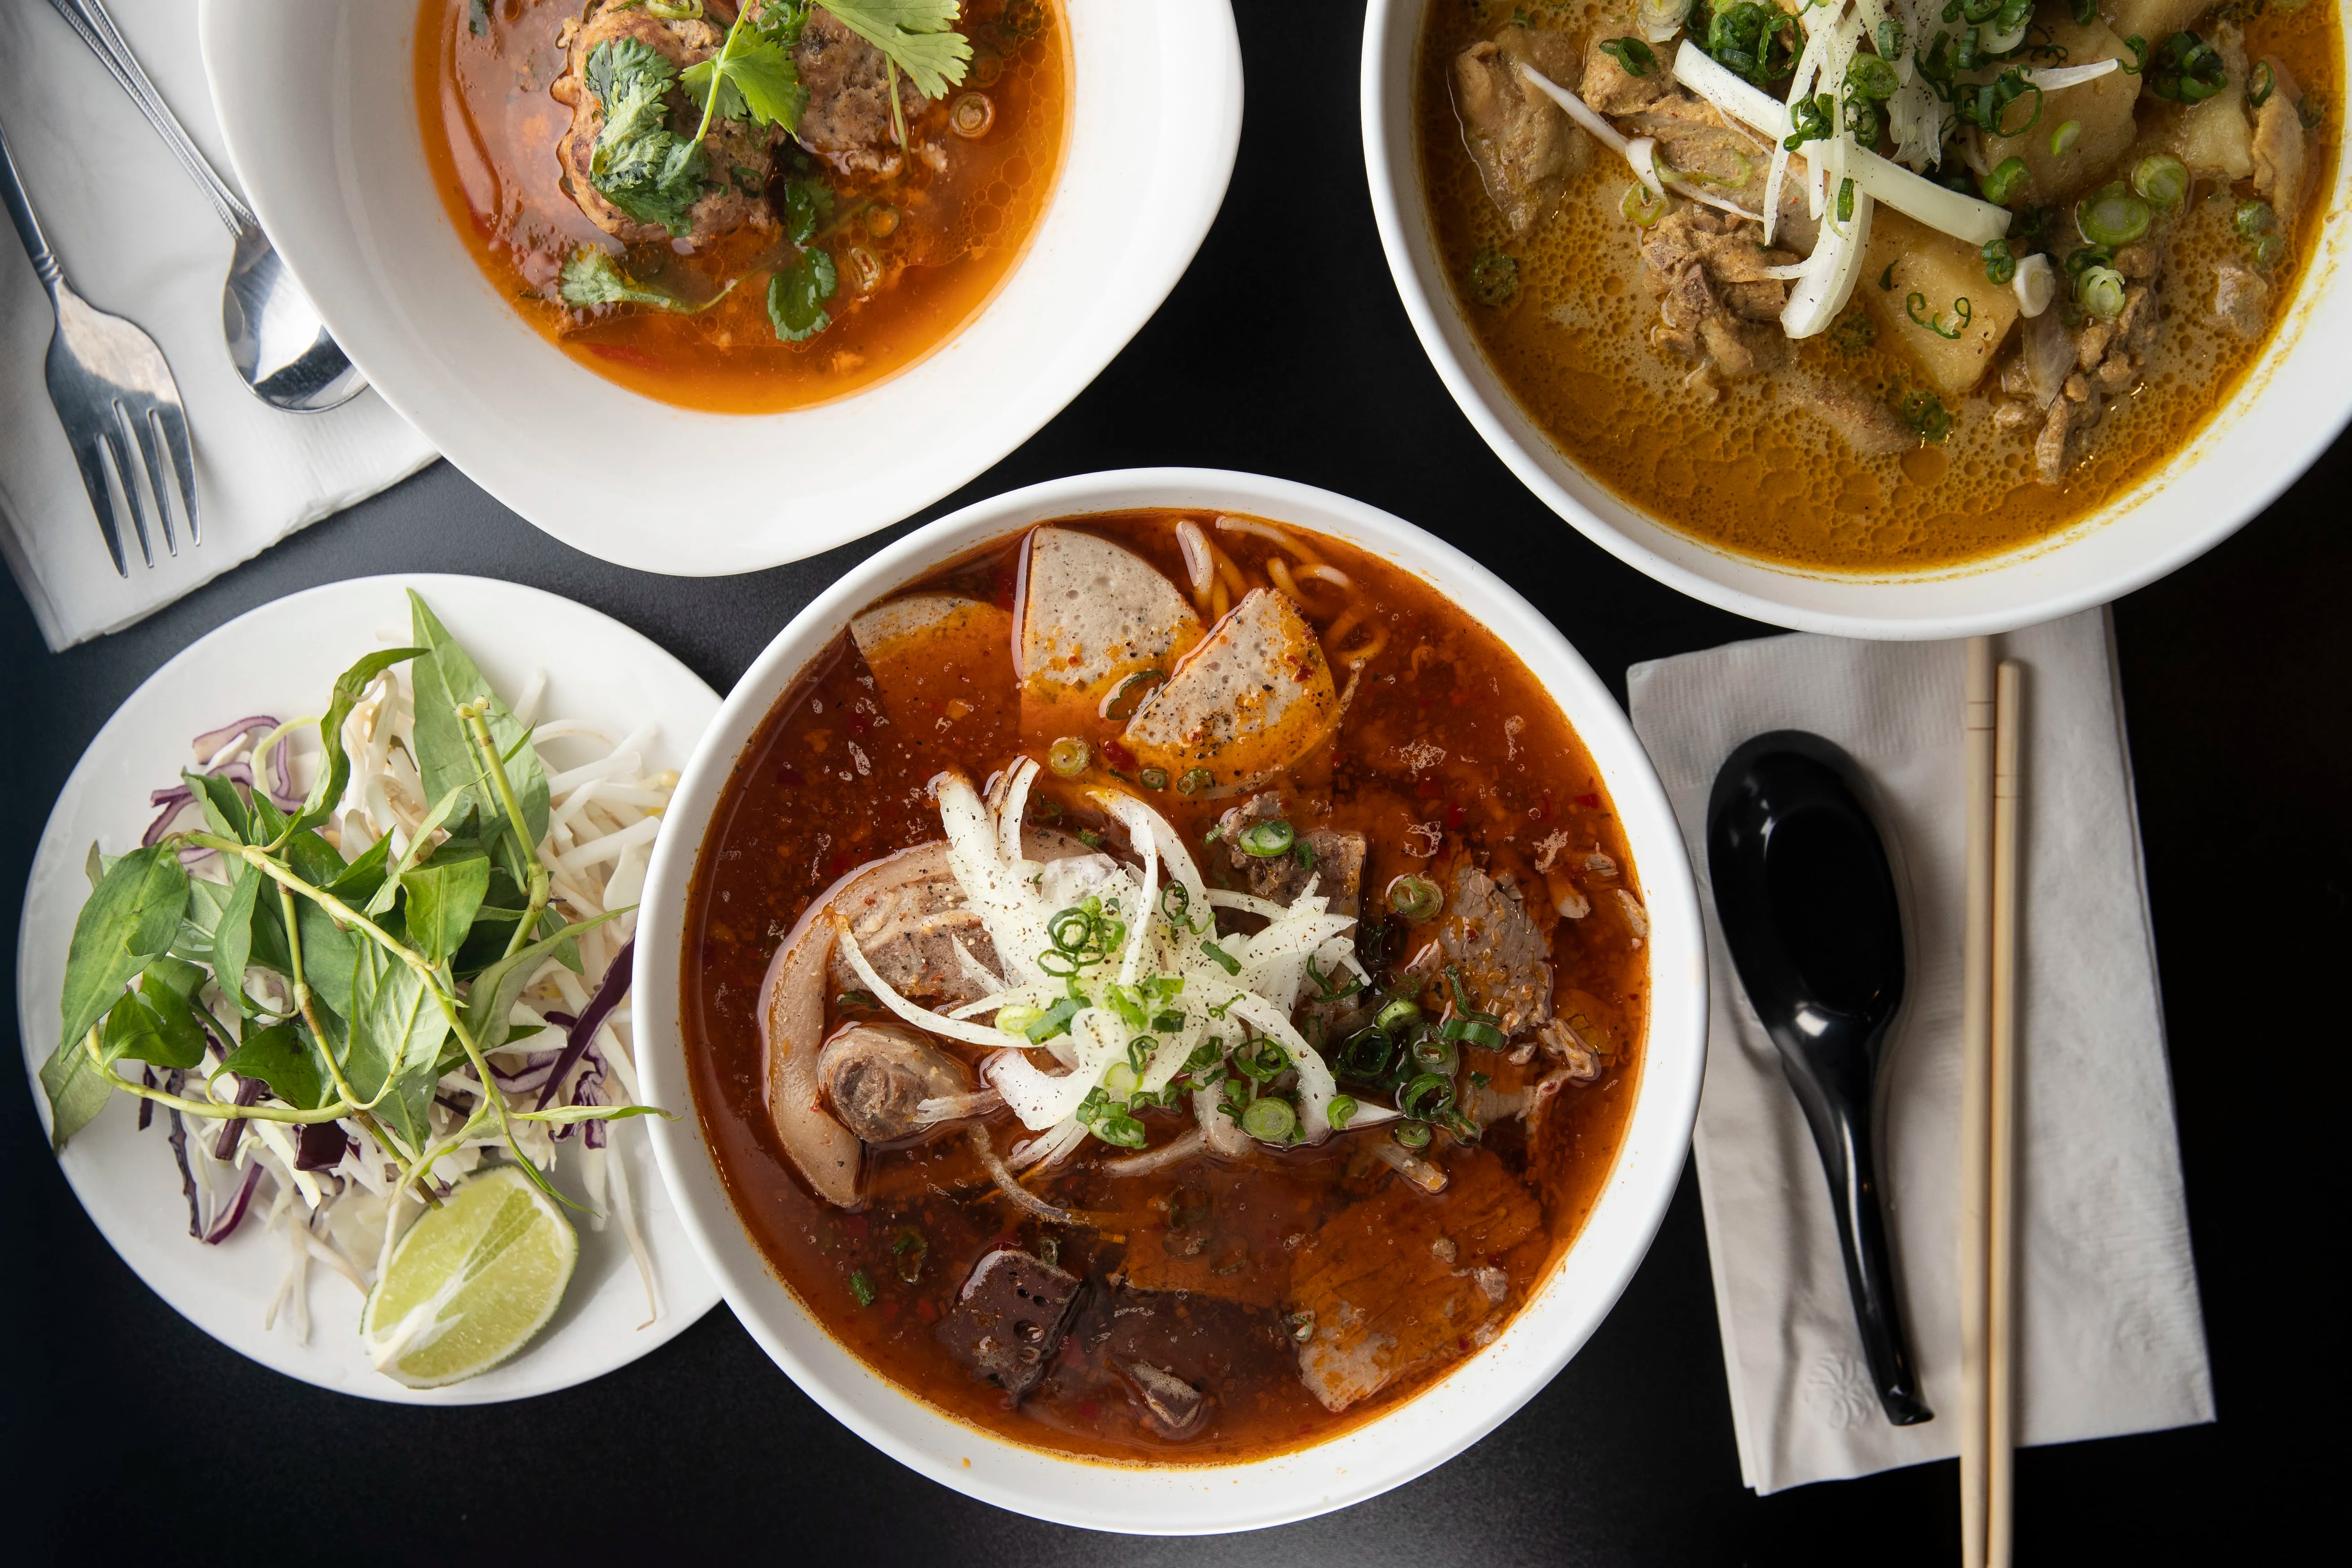 (left to right) The Banh Mi Xiu May, Bun Bo Hue Dac Biet and the chicken curry at Cafe Nhan in Philadelphia, Pa. on Monday, February 7, 2022. Cafe Nhan is located at 1606 W Passyunk Avenue.